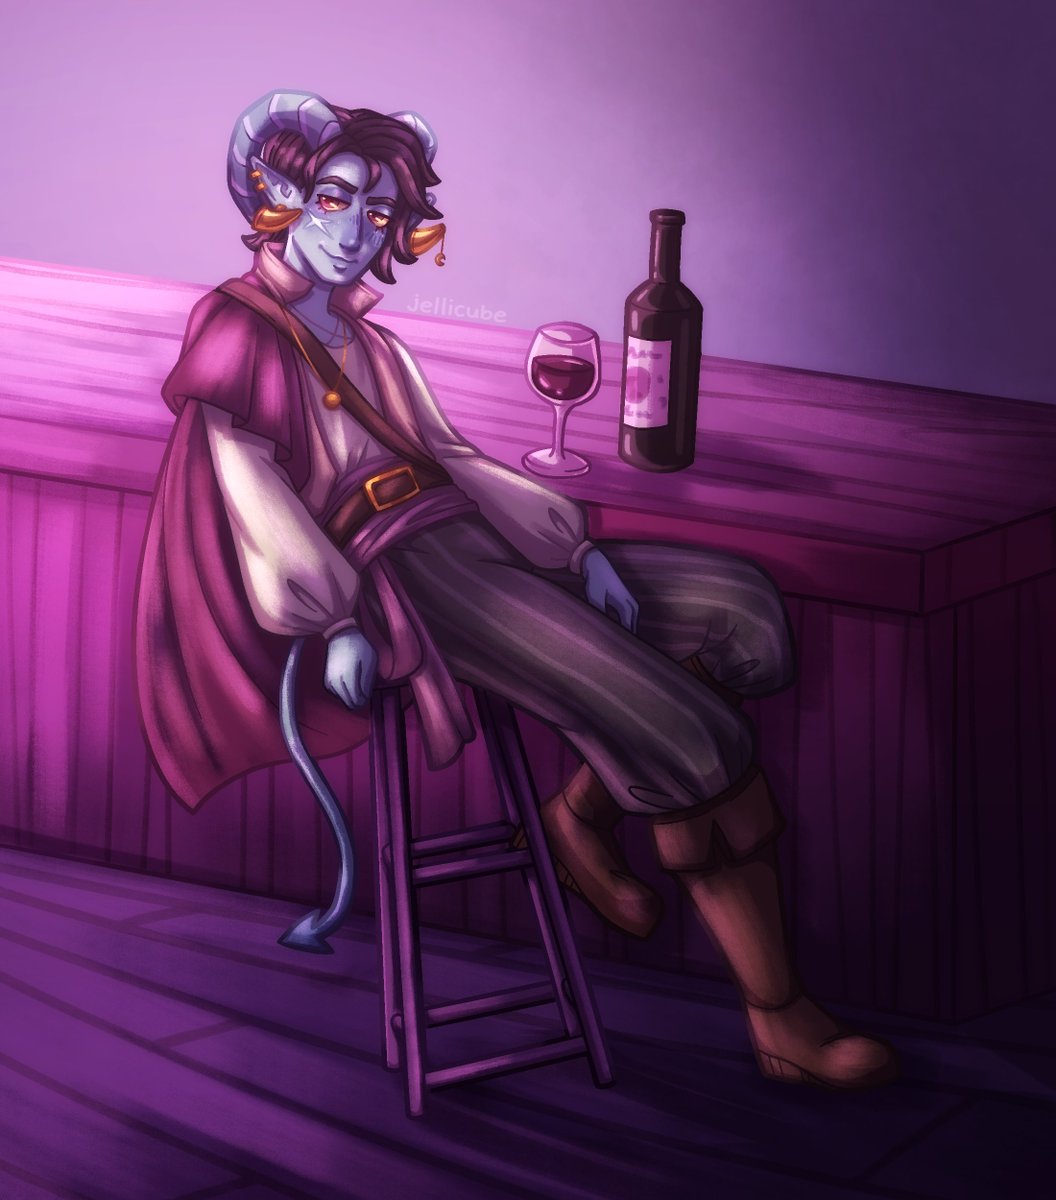 another #artfight attack!! this is UnderiScore's character maleus, love his design! tieflings are always fun~ 😈🍷📿🎻 #artfight2023 #artfightvampires #artfightattack #dndcharacter